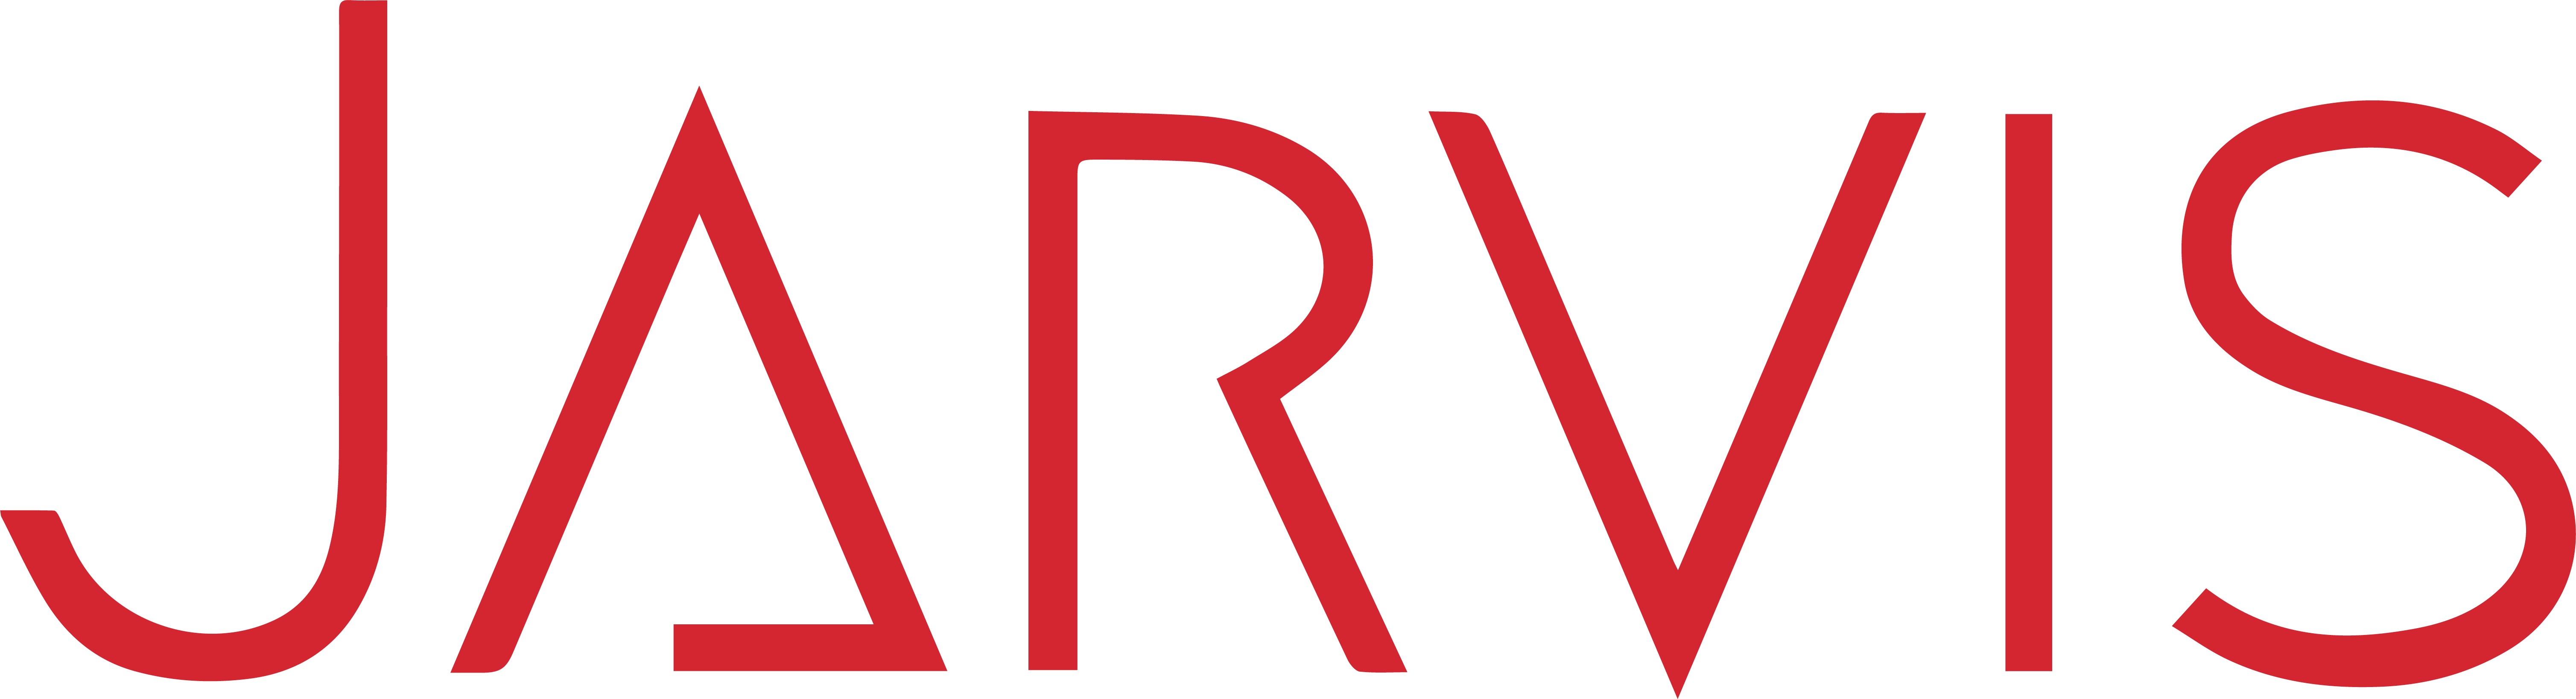 Jarvis Red Logo